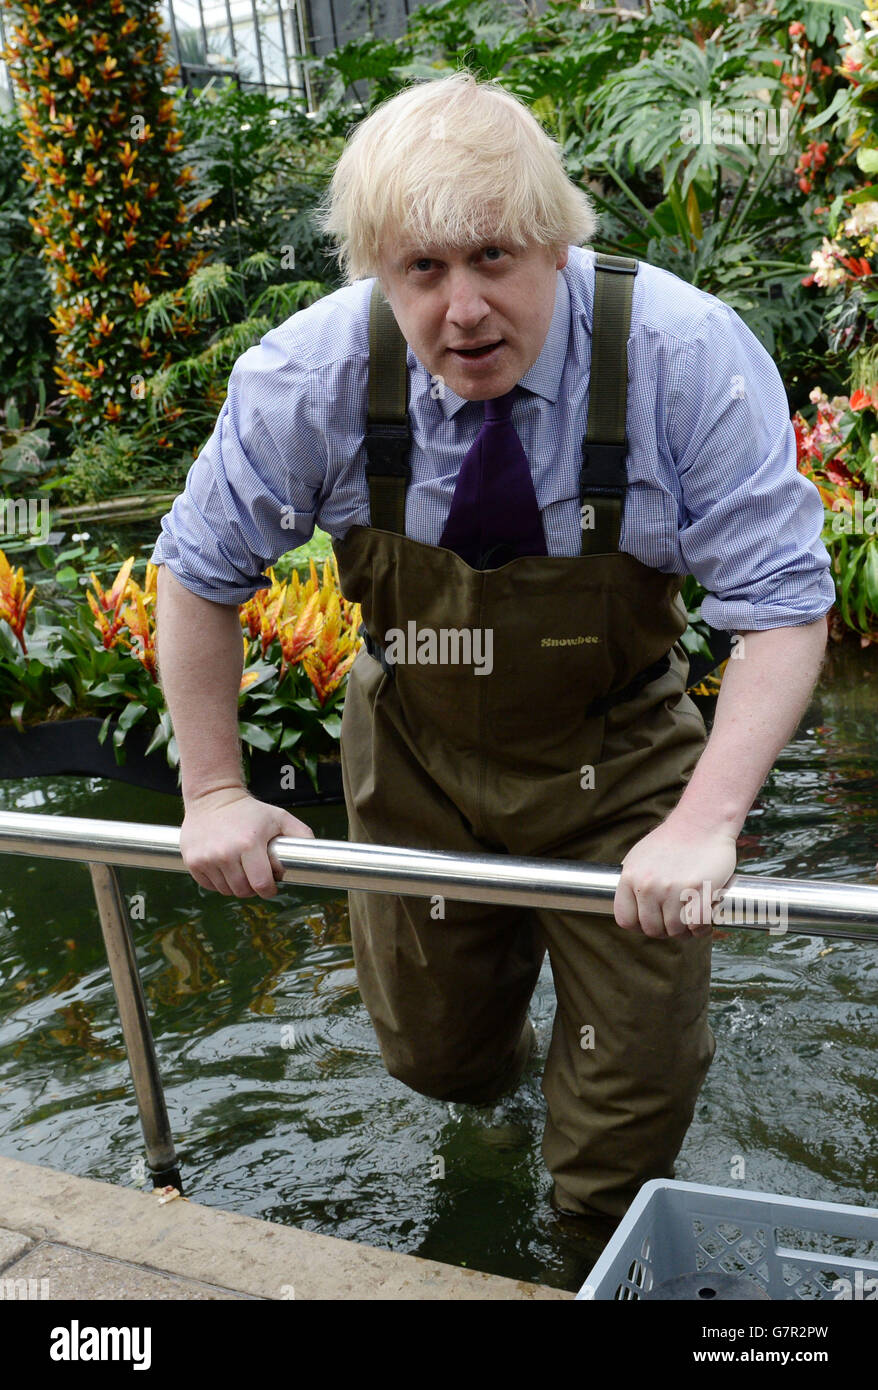 Mayor of London Boris Johnson plants flowers at the Royal Botanical Gardens where he joined Kew apprentices, diploma students, and Kew horticulturist Carlos Magdalena to plant young Victoria Amazonica Waterlilies, a colourful hybrid of waterlilies and lotus plants, in the Princess of Wales Conservatory at Kew Gardens. Stock Photo